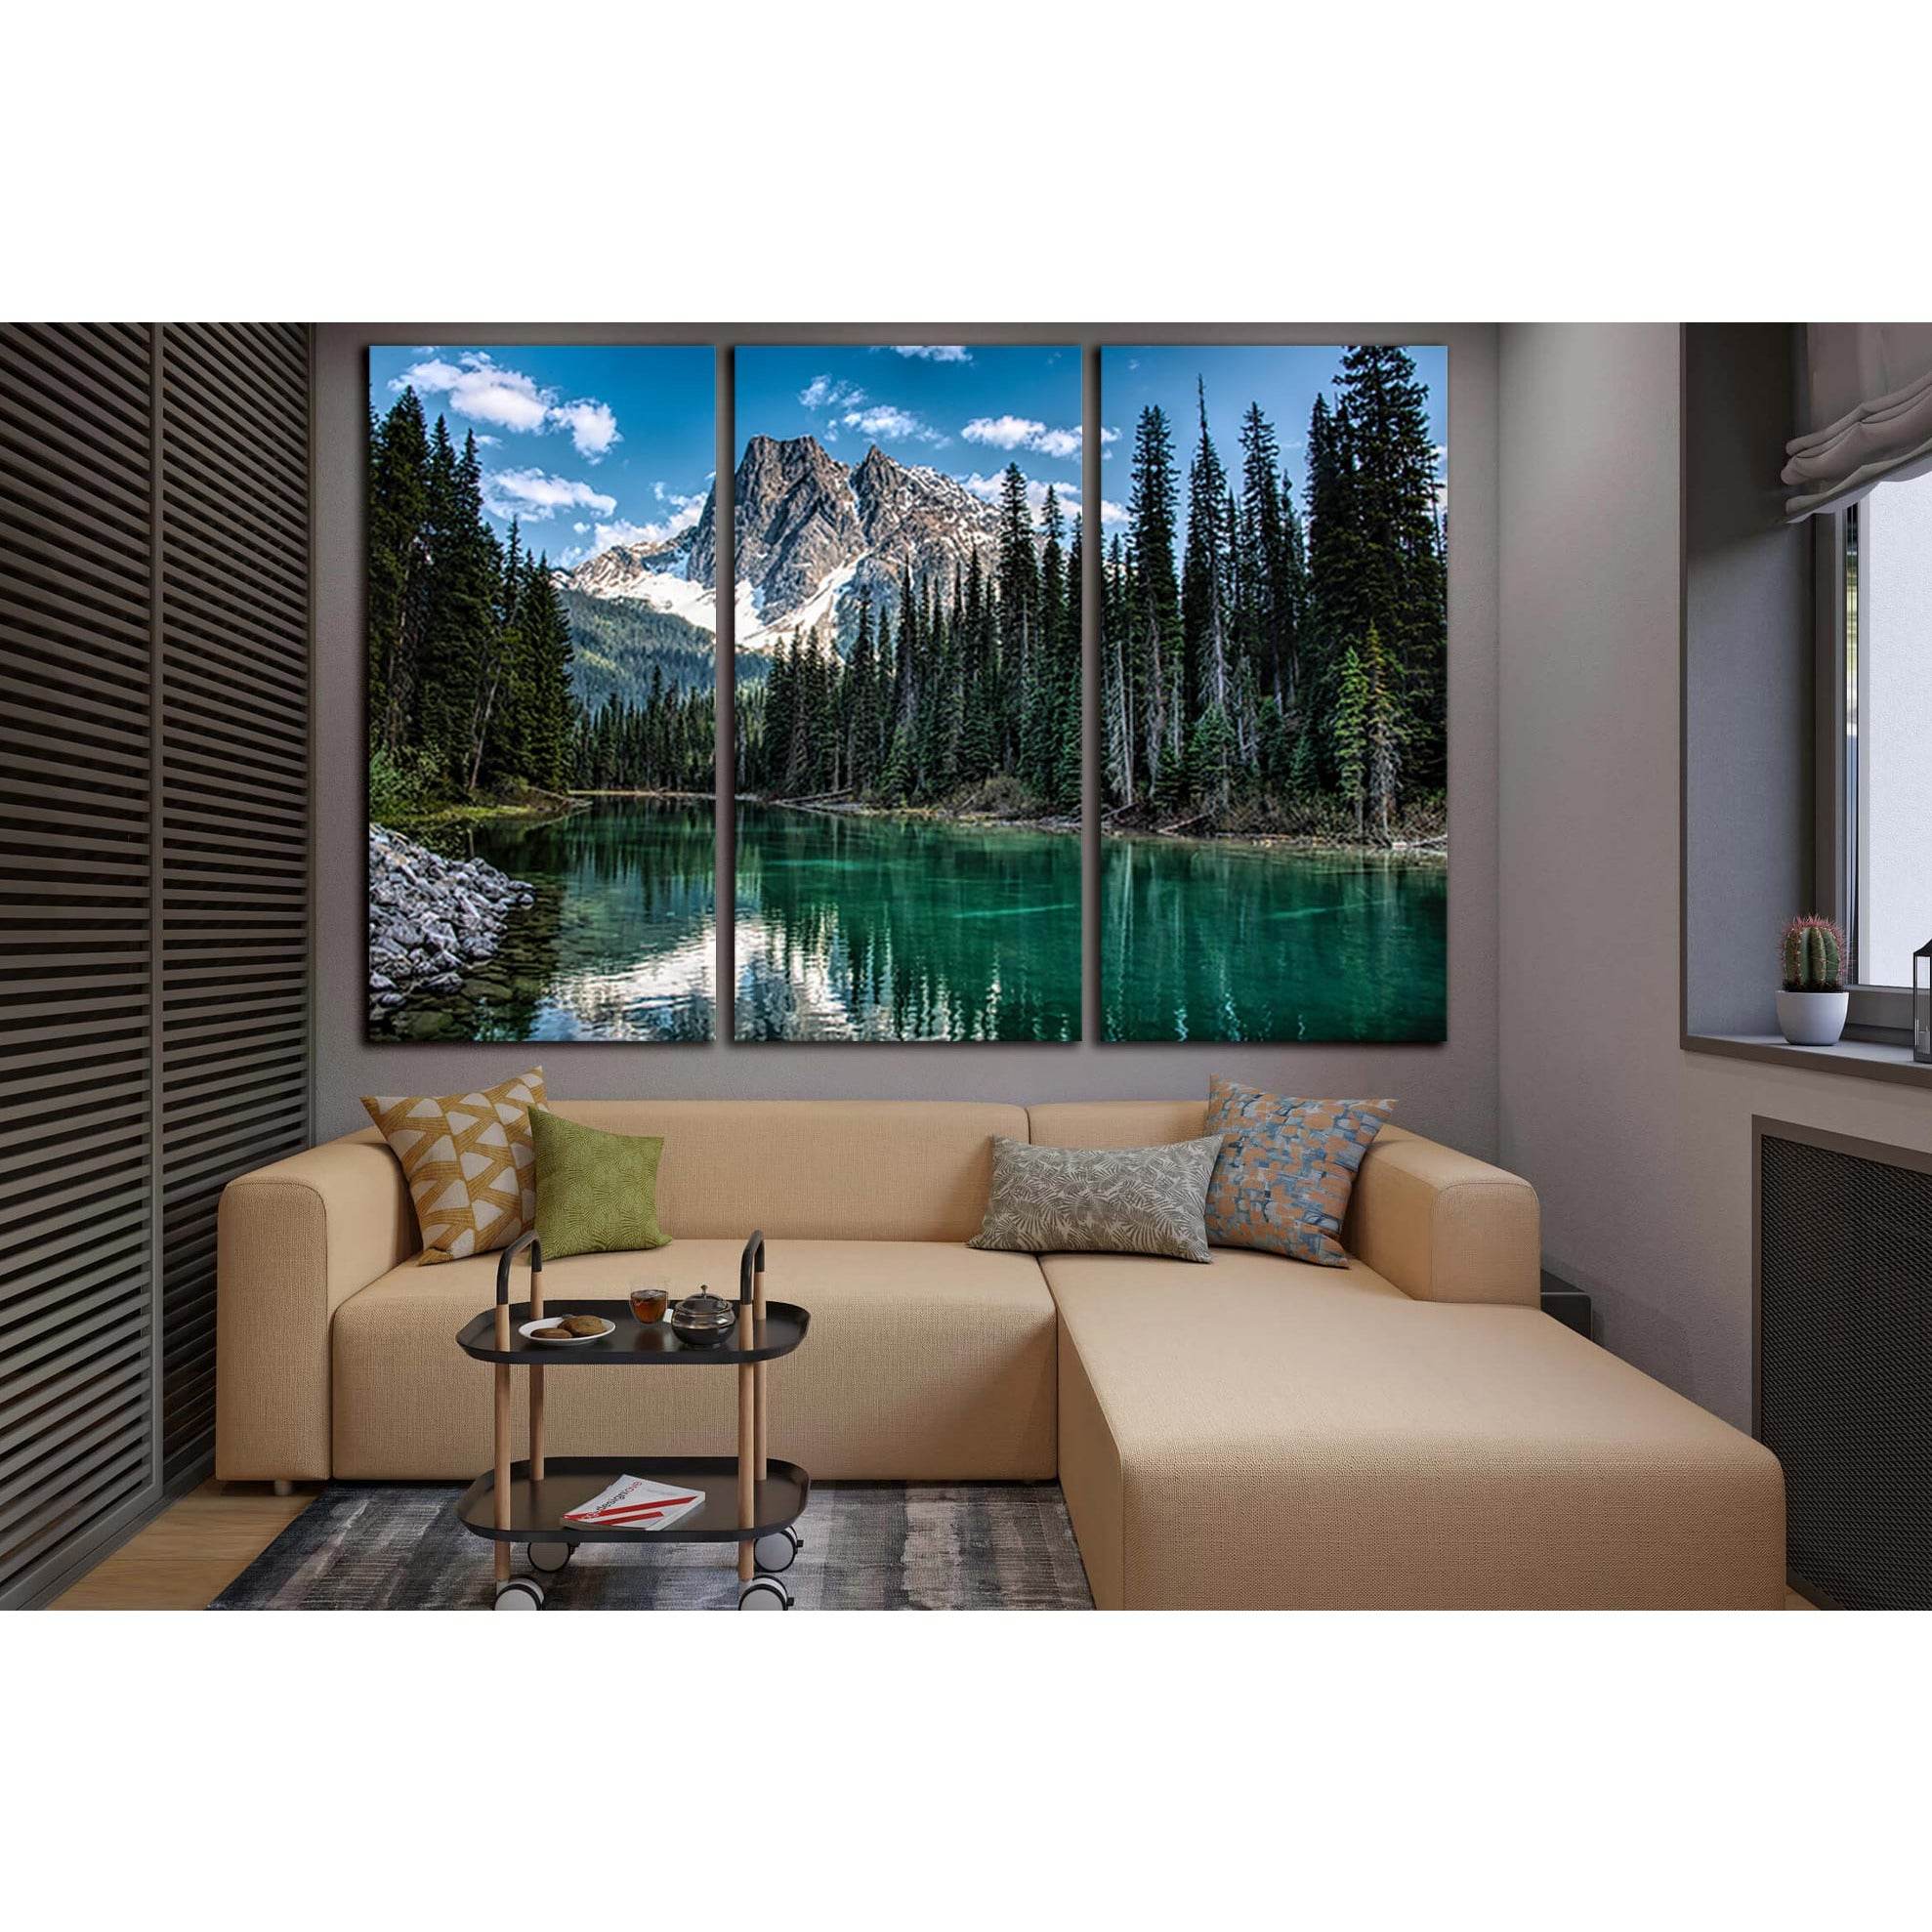 River In Mountain Forest №SL1596 Ready to Hang Canvas Print